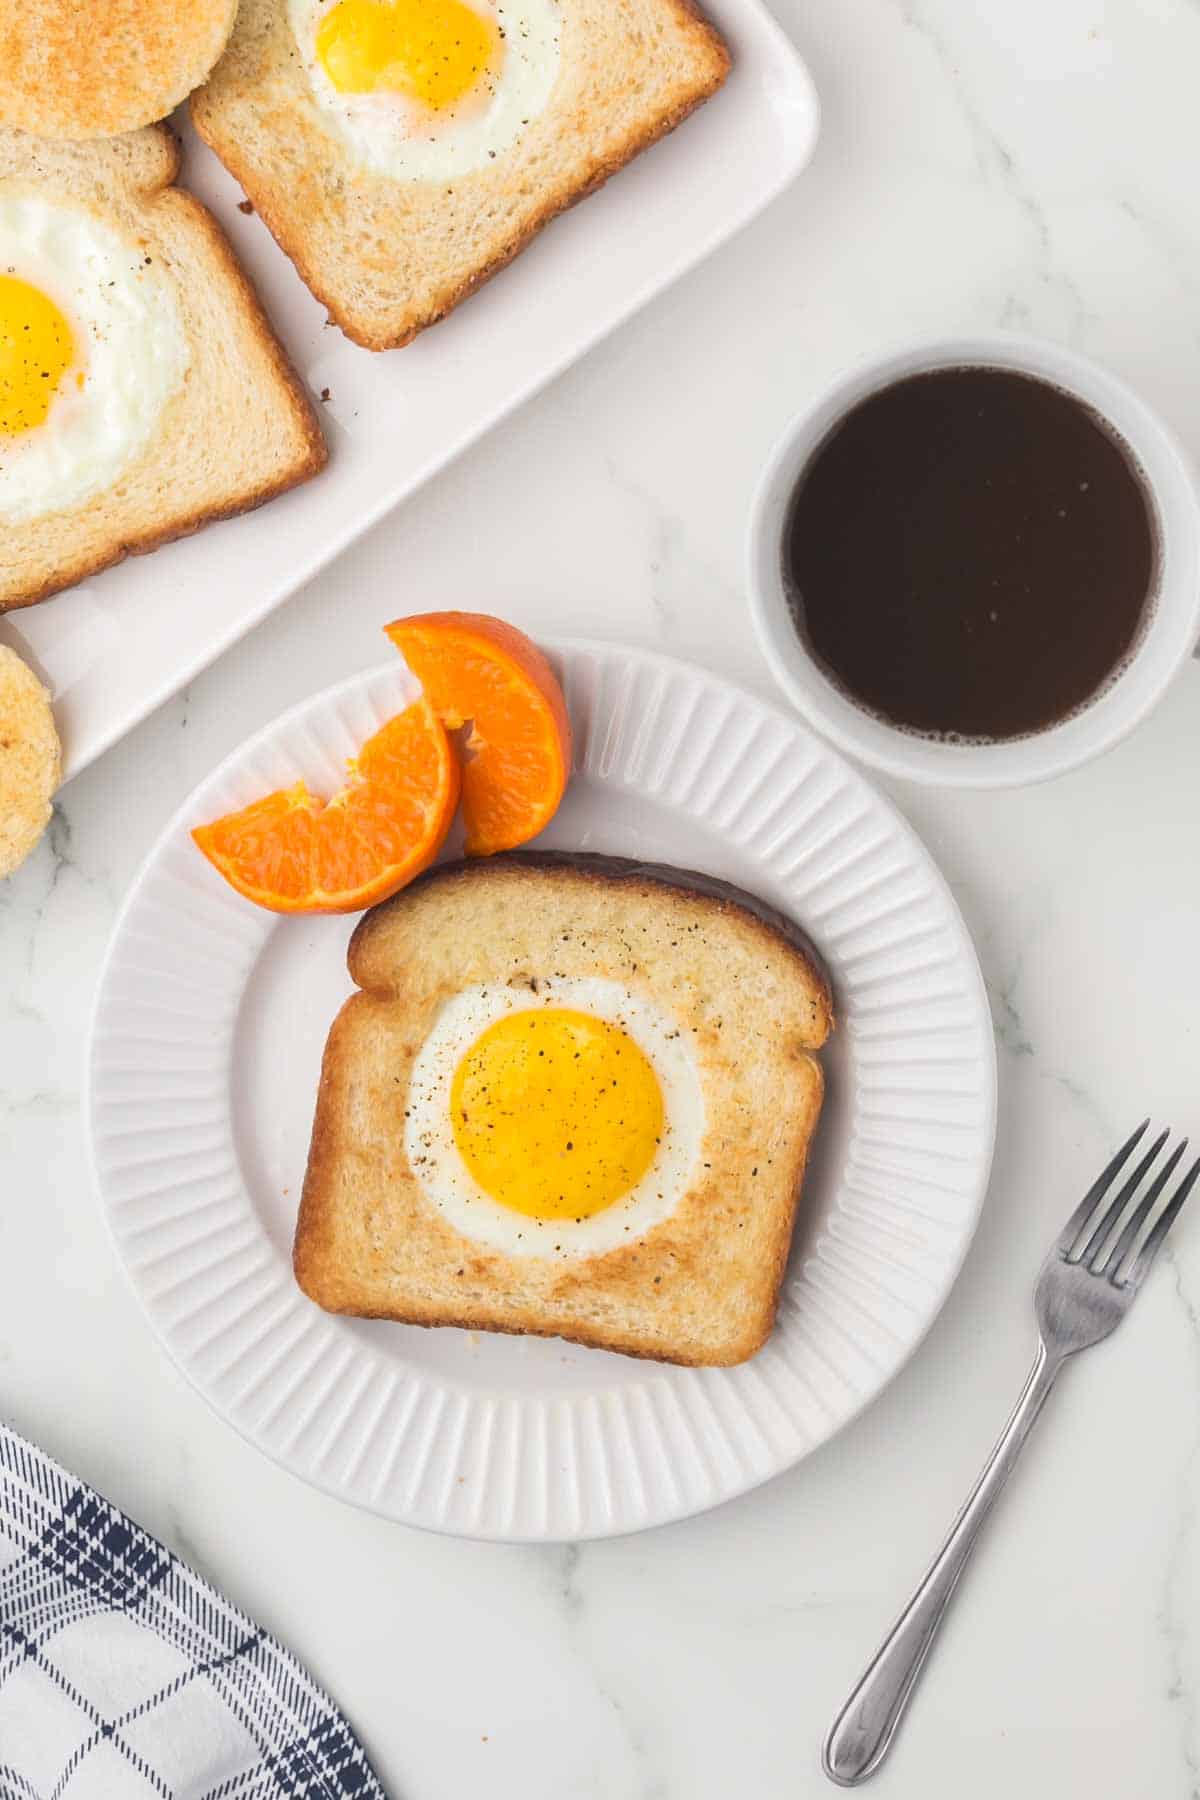 egg fried in a hole of toast with oranges and coffee